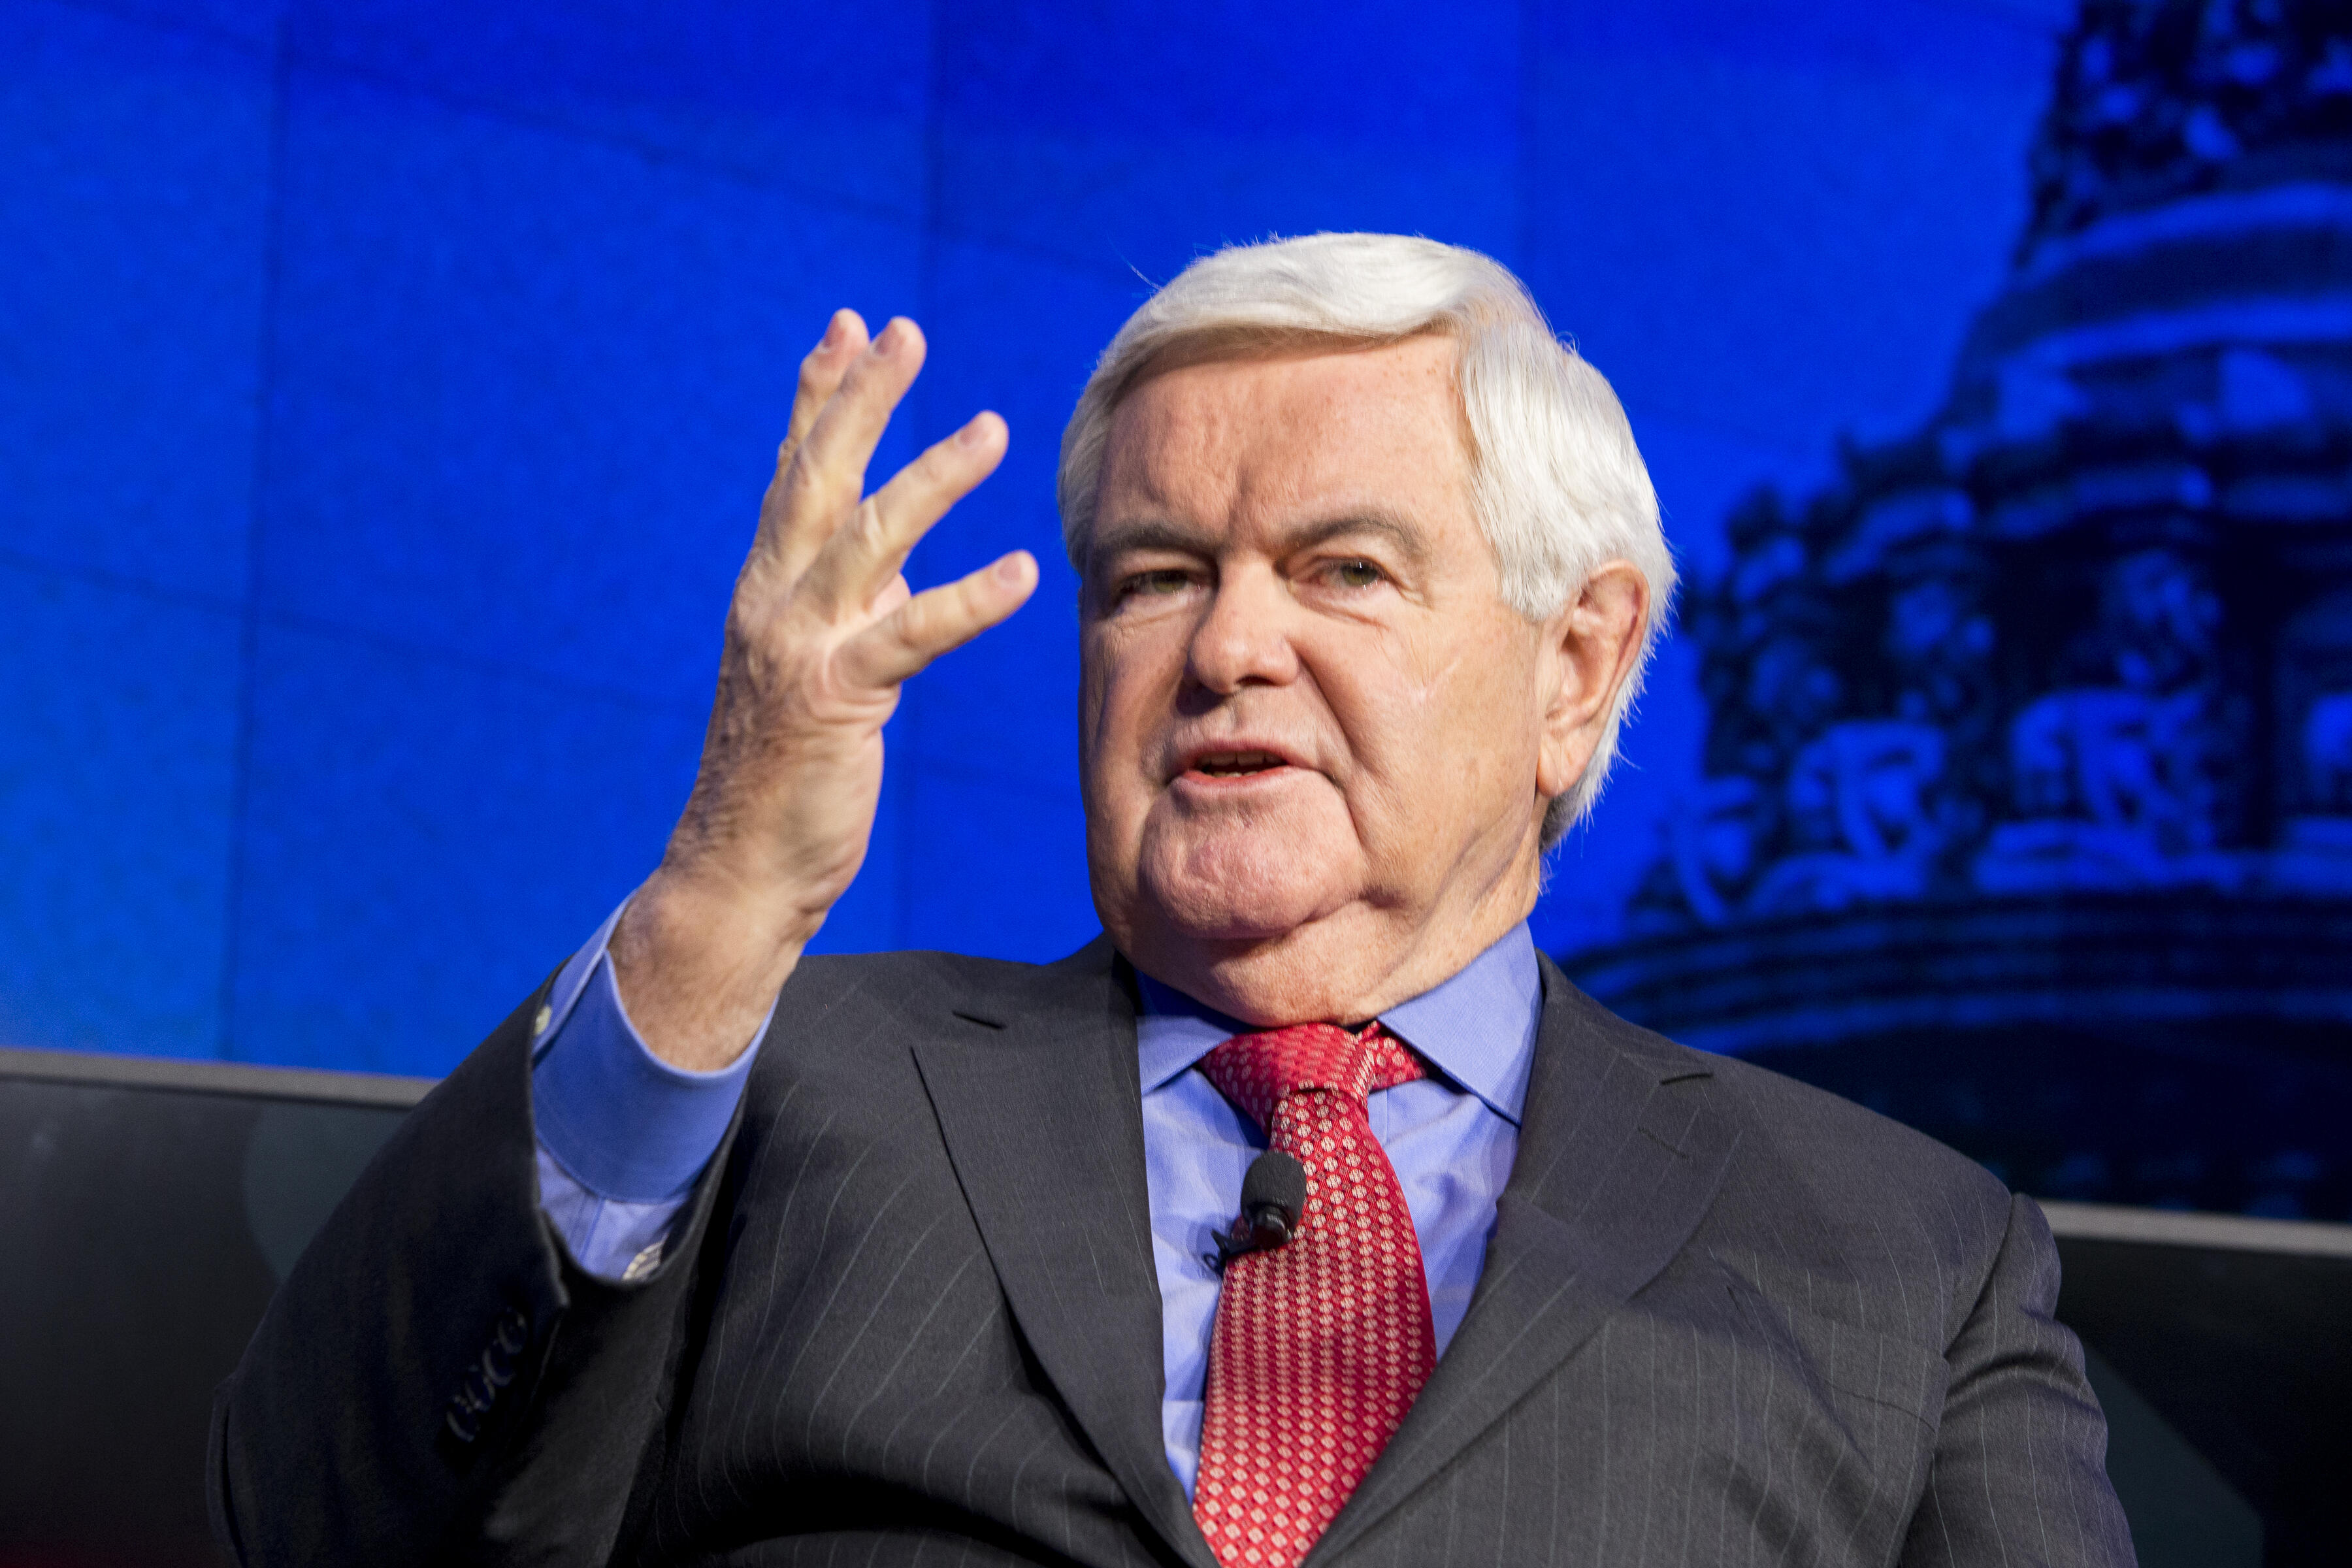 WASHINGTON, DC- DECEMBER 16: The Washington Post via Getty Images hosts The Daily 202 Live with James Hohmann interviewing Newt Gingrich. (Photo by April Greer For The Washington Post via Getty Images)